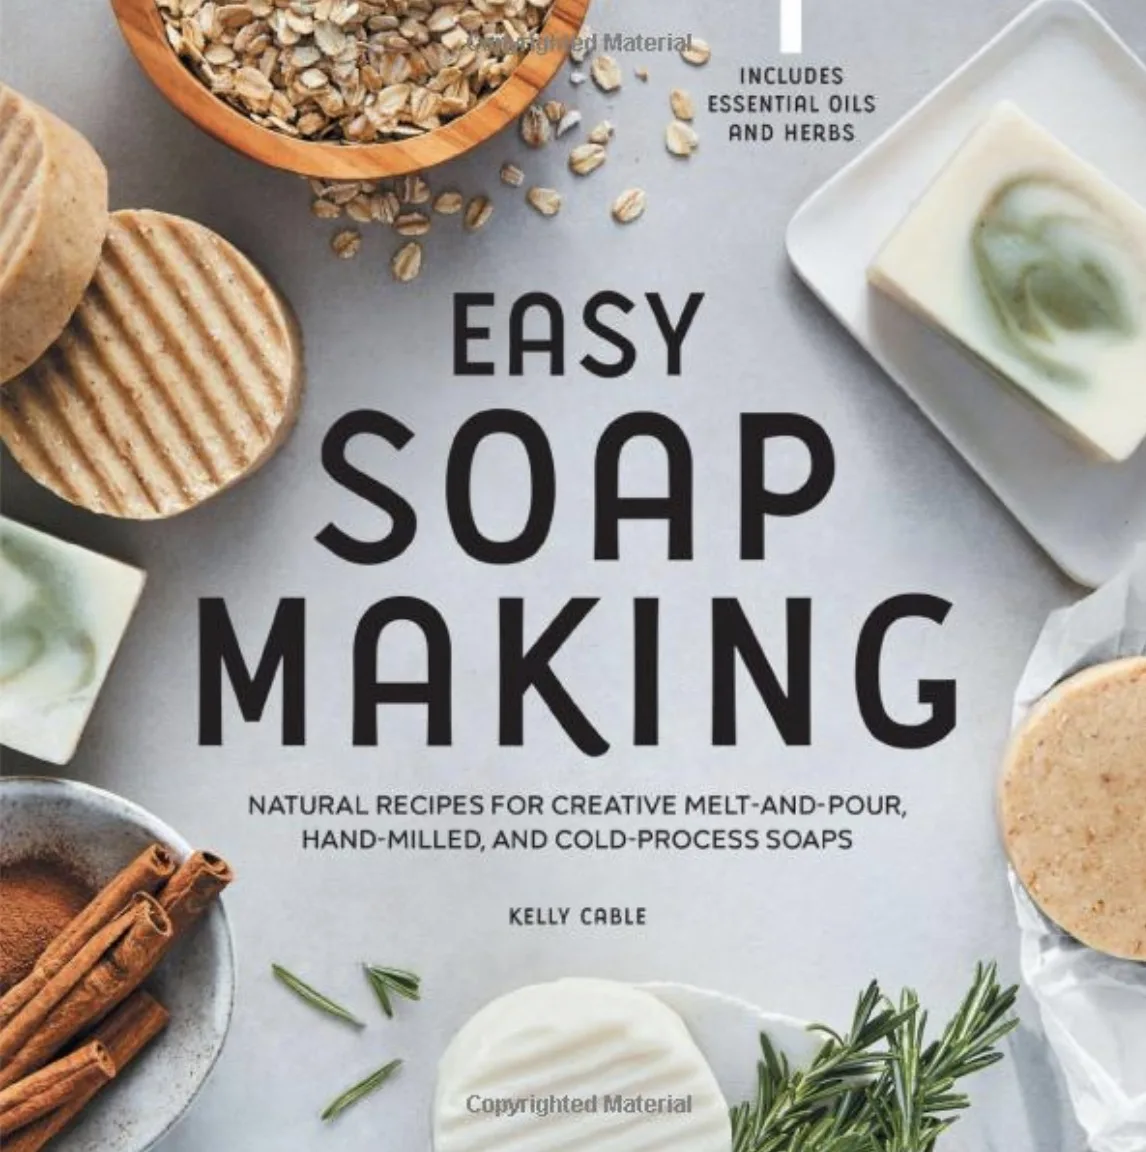 Easy Soap Making by Kelly Cable